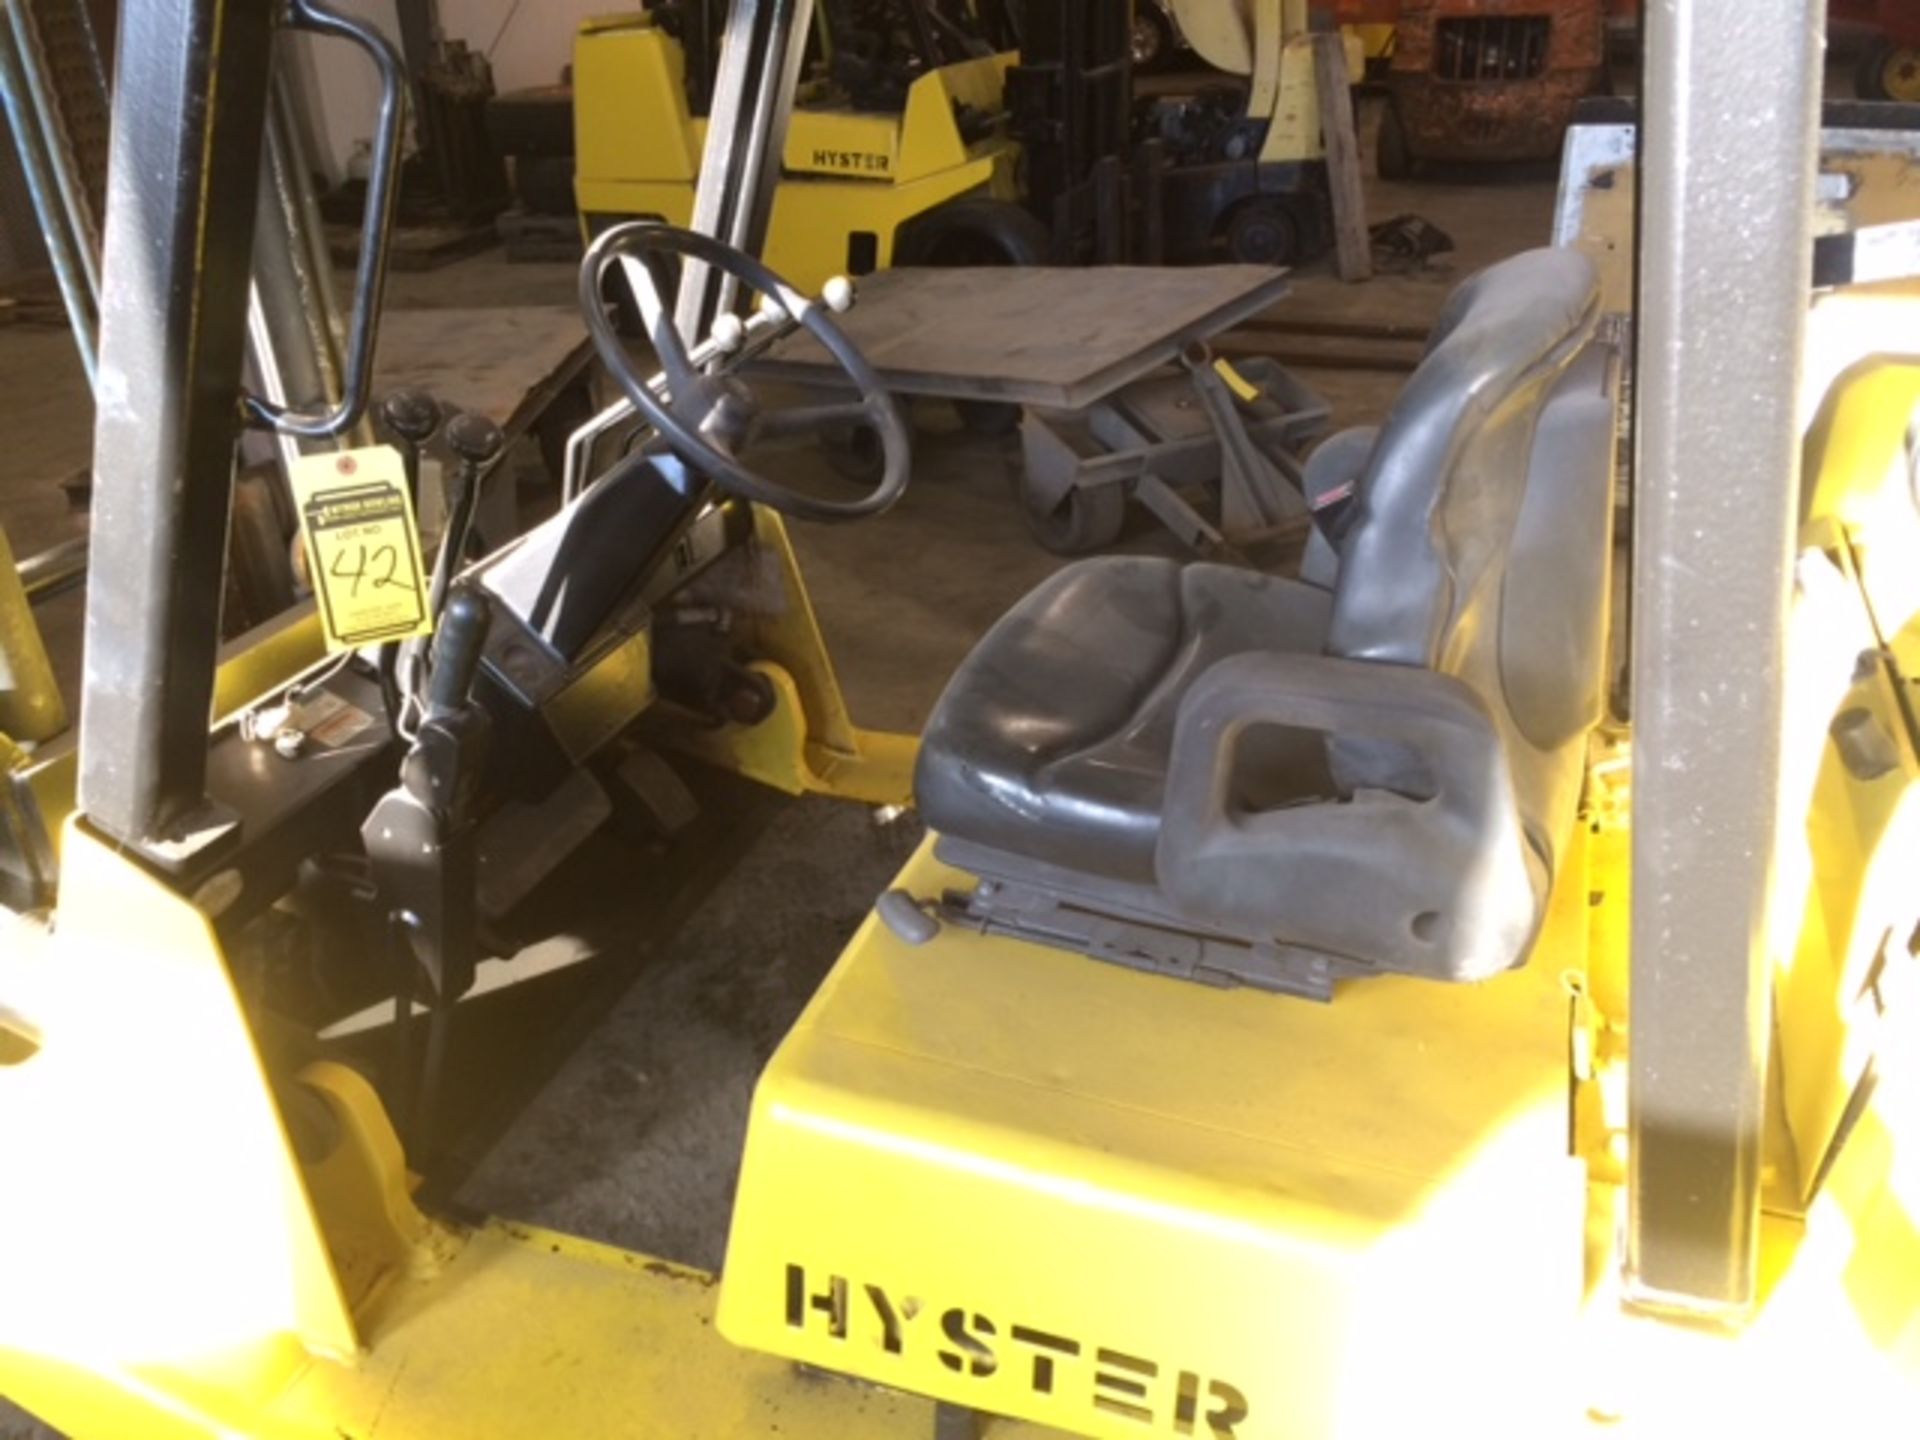 2006 HYSTER 15,500-lb. Capacity Forklift, Model S155XL2, Perkins Diesel Engine, 2-Speed Lever - Image 4 of 4